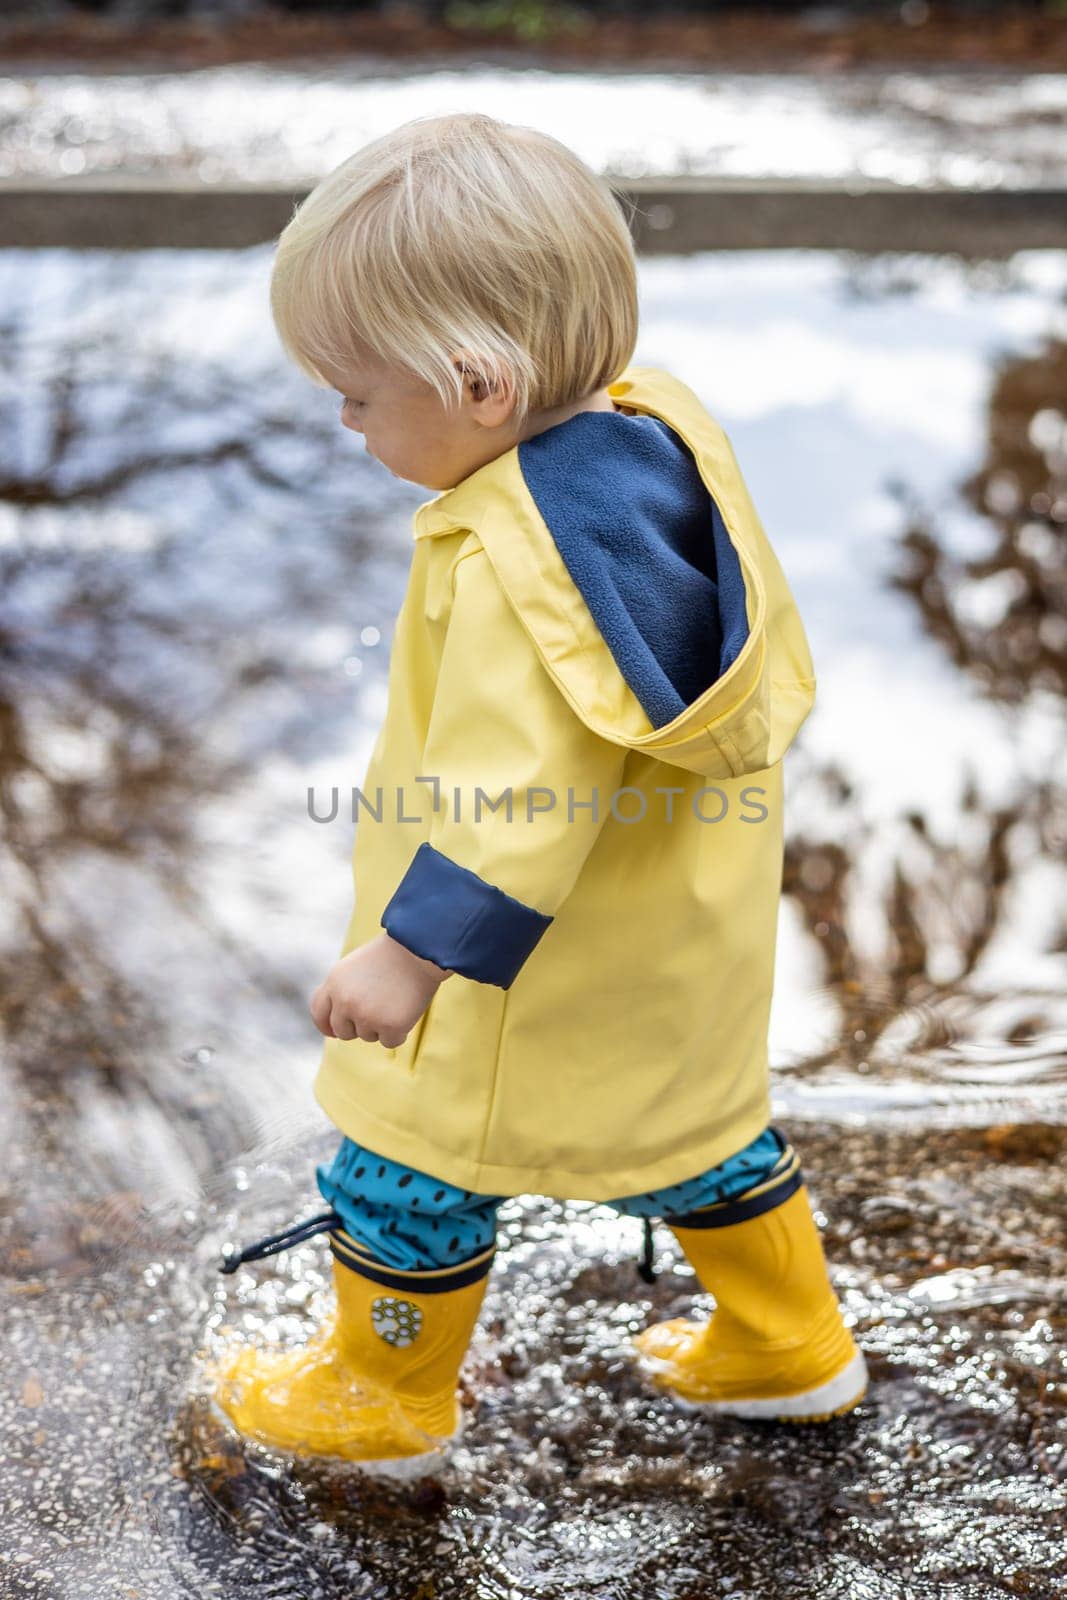 Small bond infant boy wearing yellow rubber boots and yellow waterproof raincoat walking in puddles on a overcast rainy day. Child in the rain. by kasto